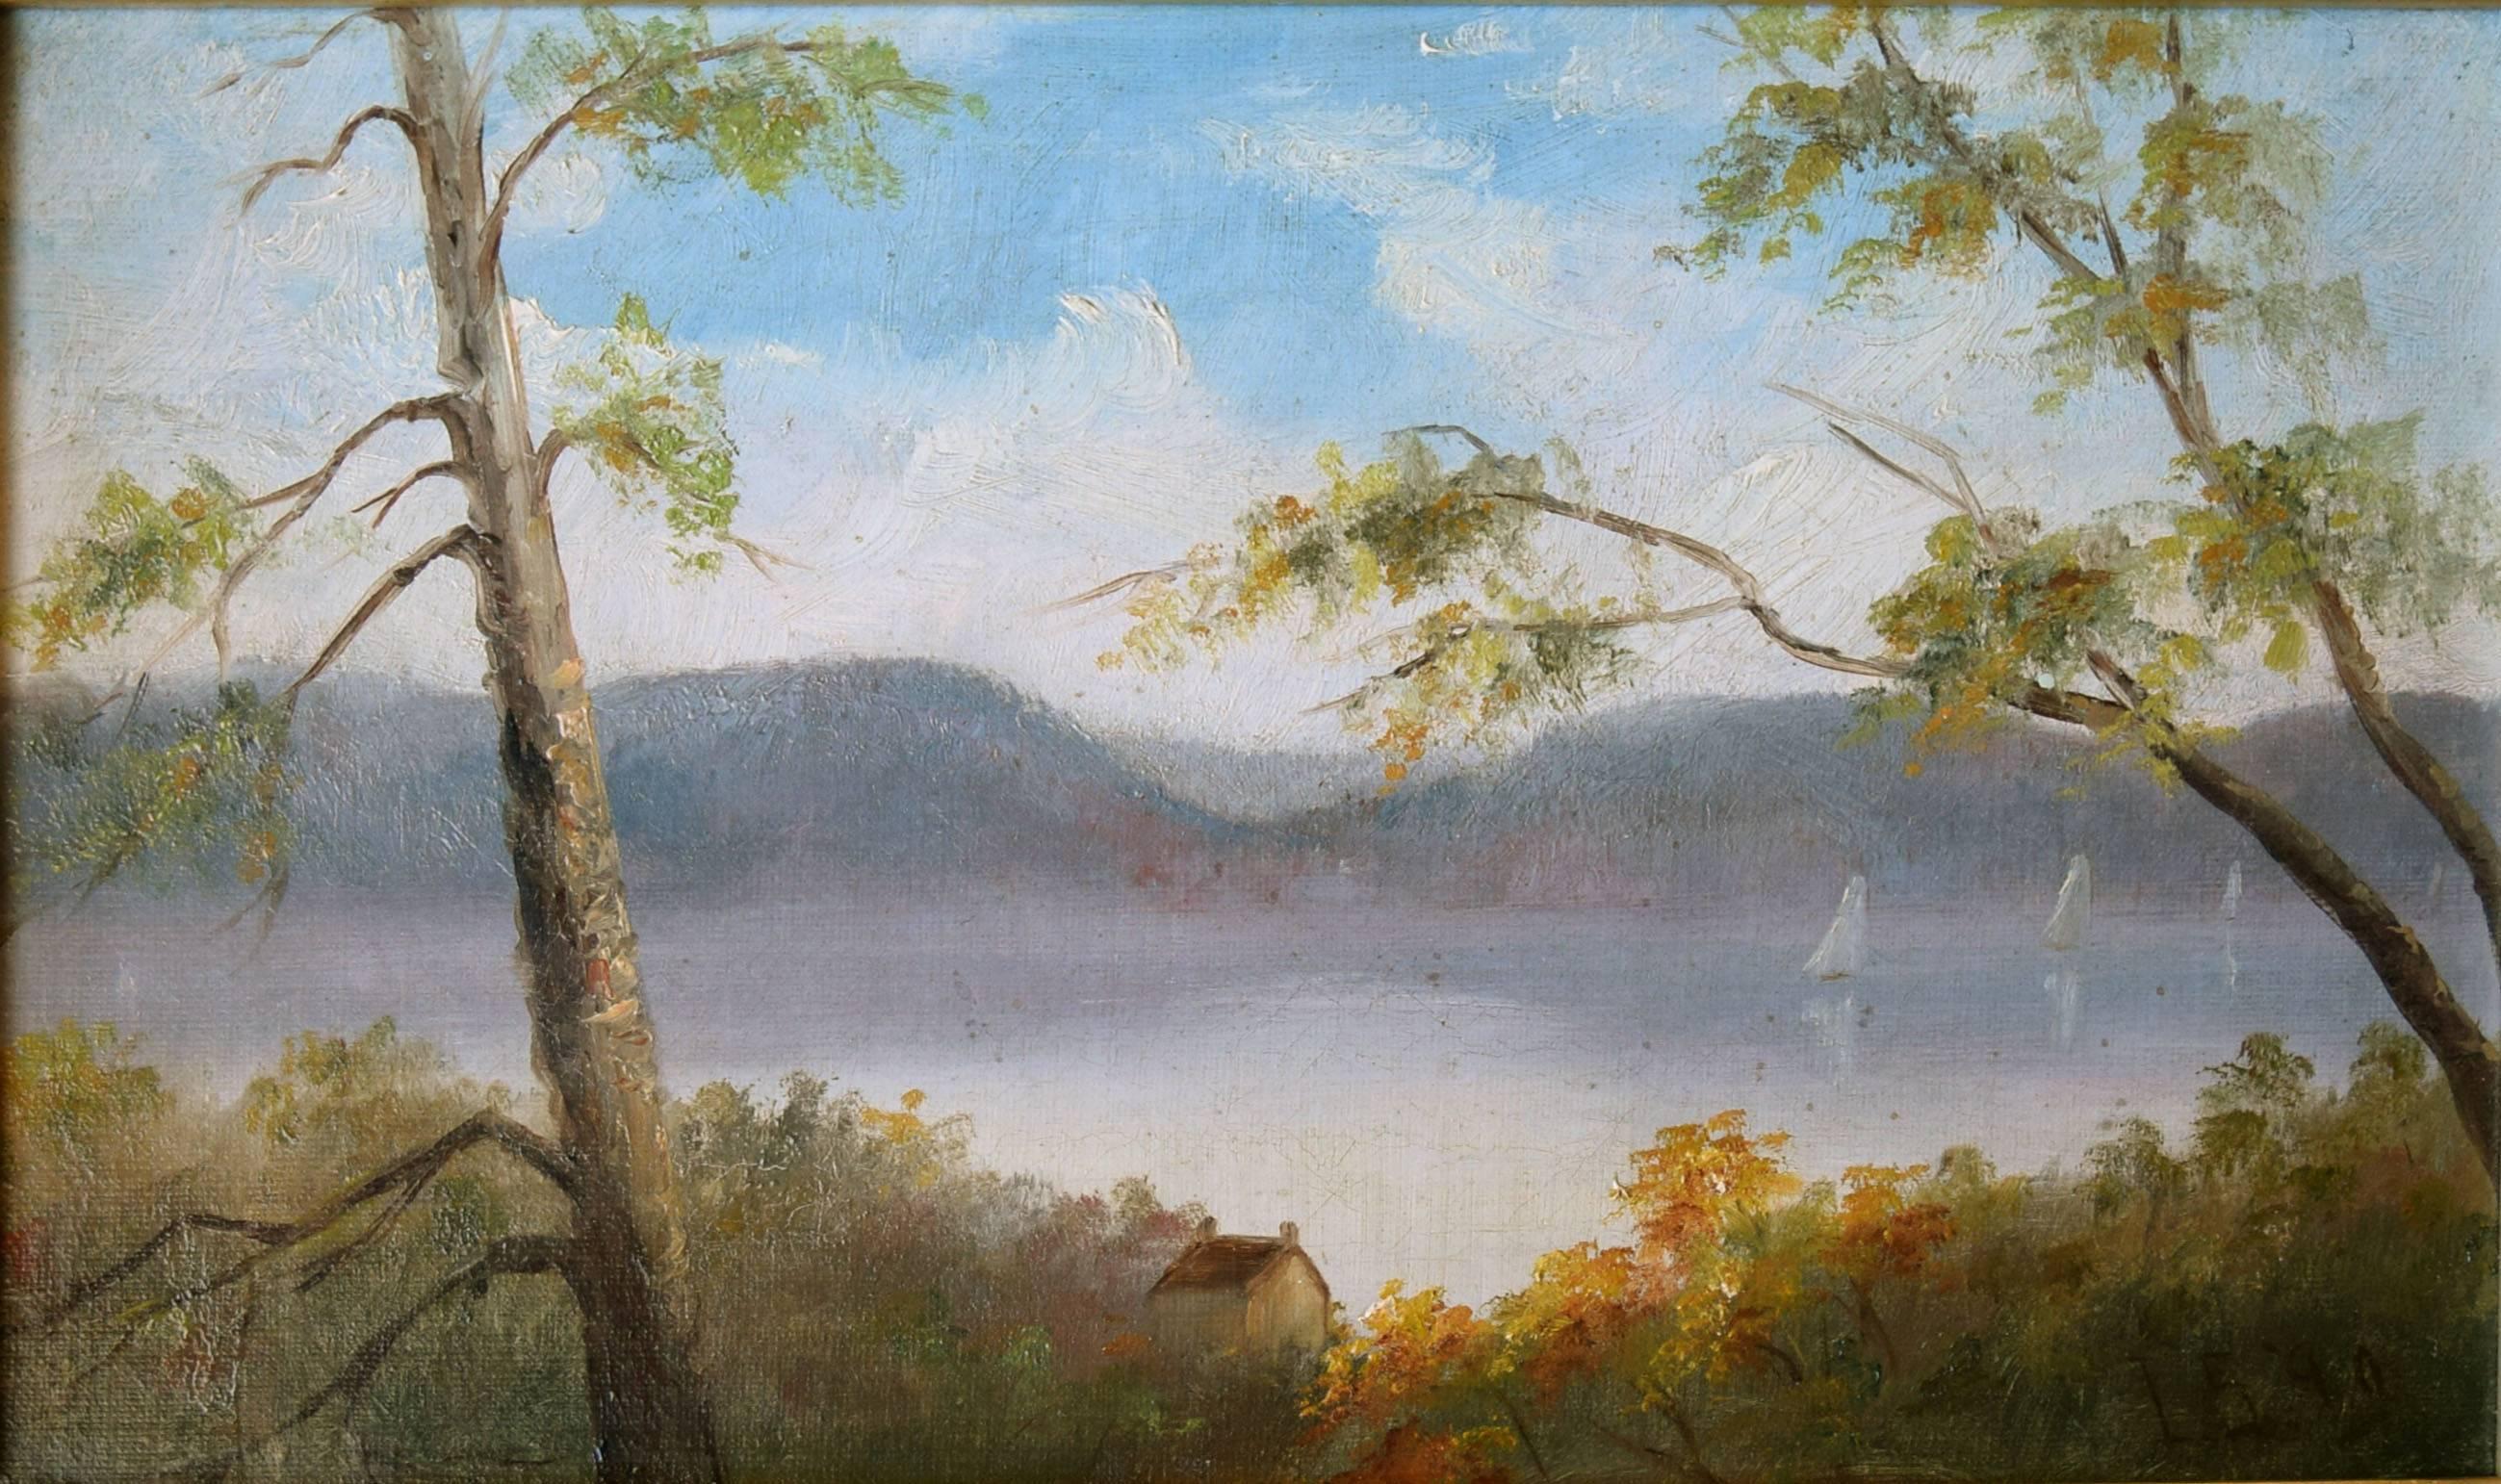 Sailing on the Lake, Woodstock, NY - Painting by Unknown